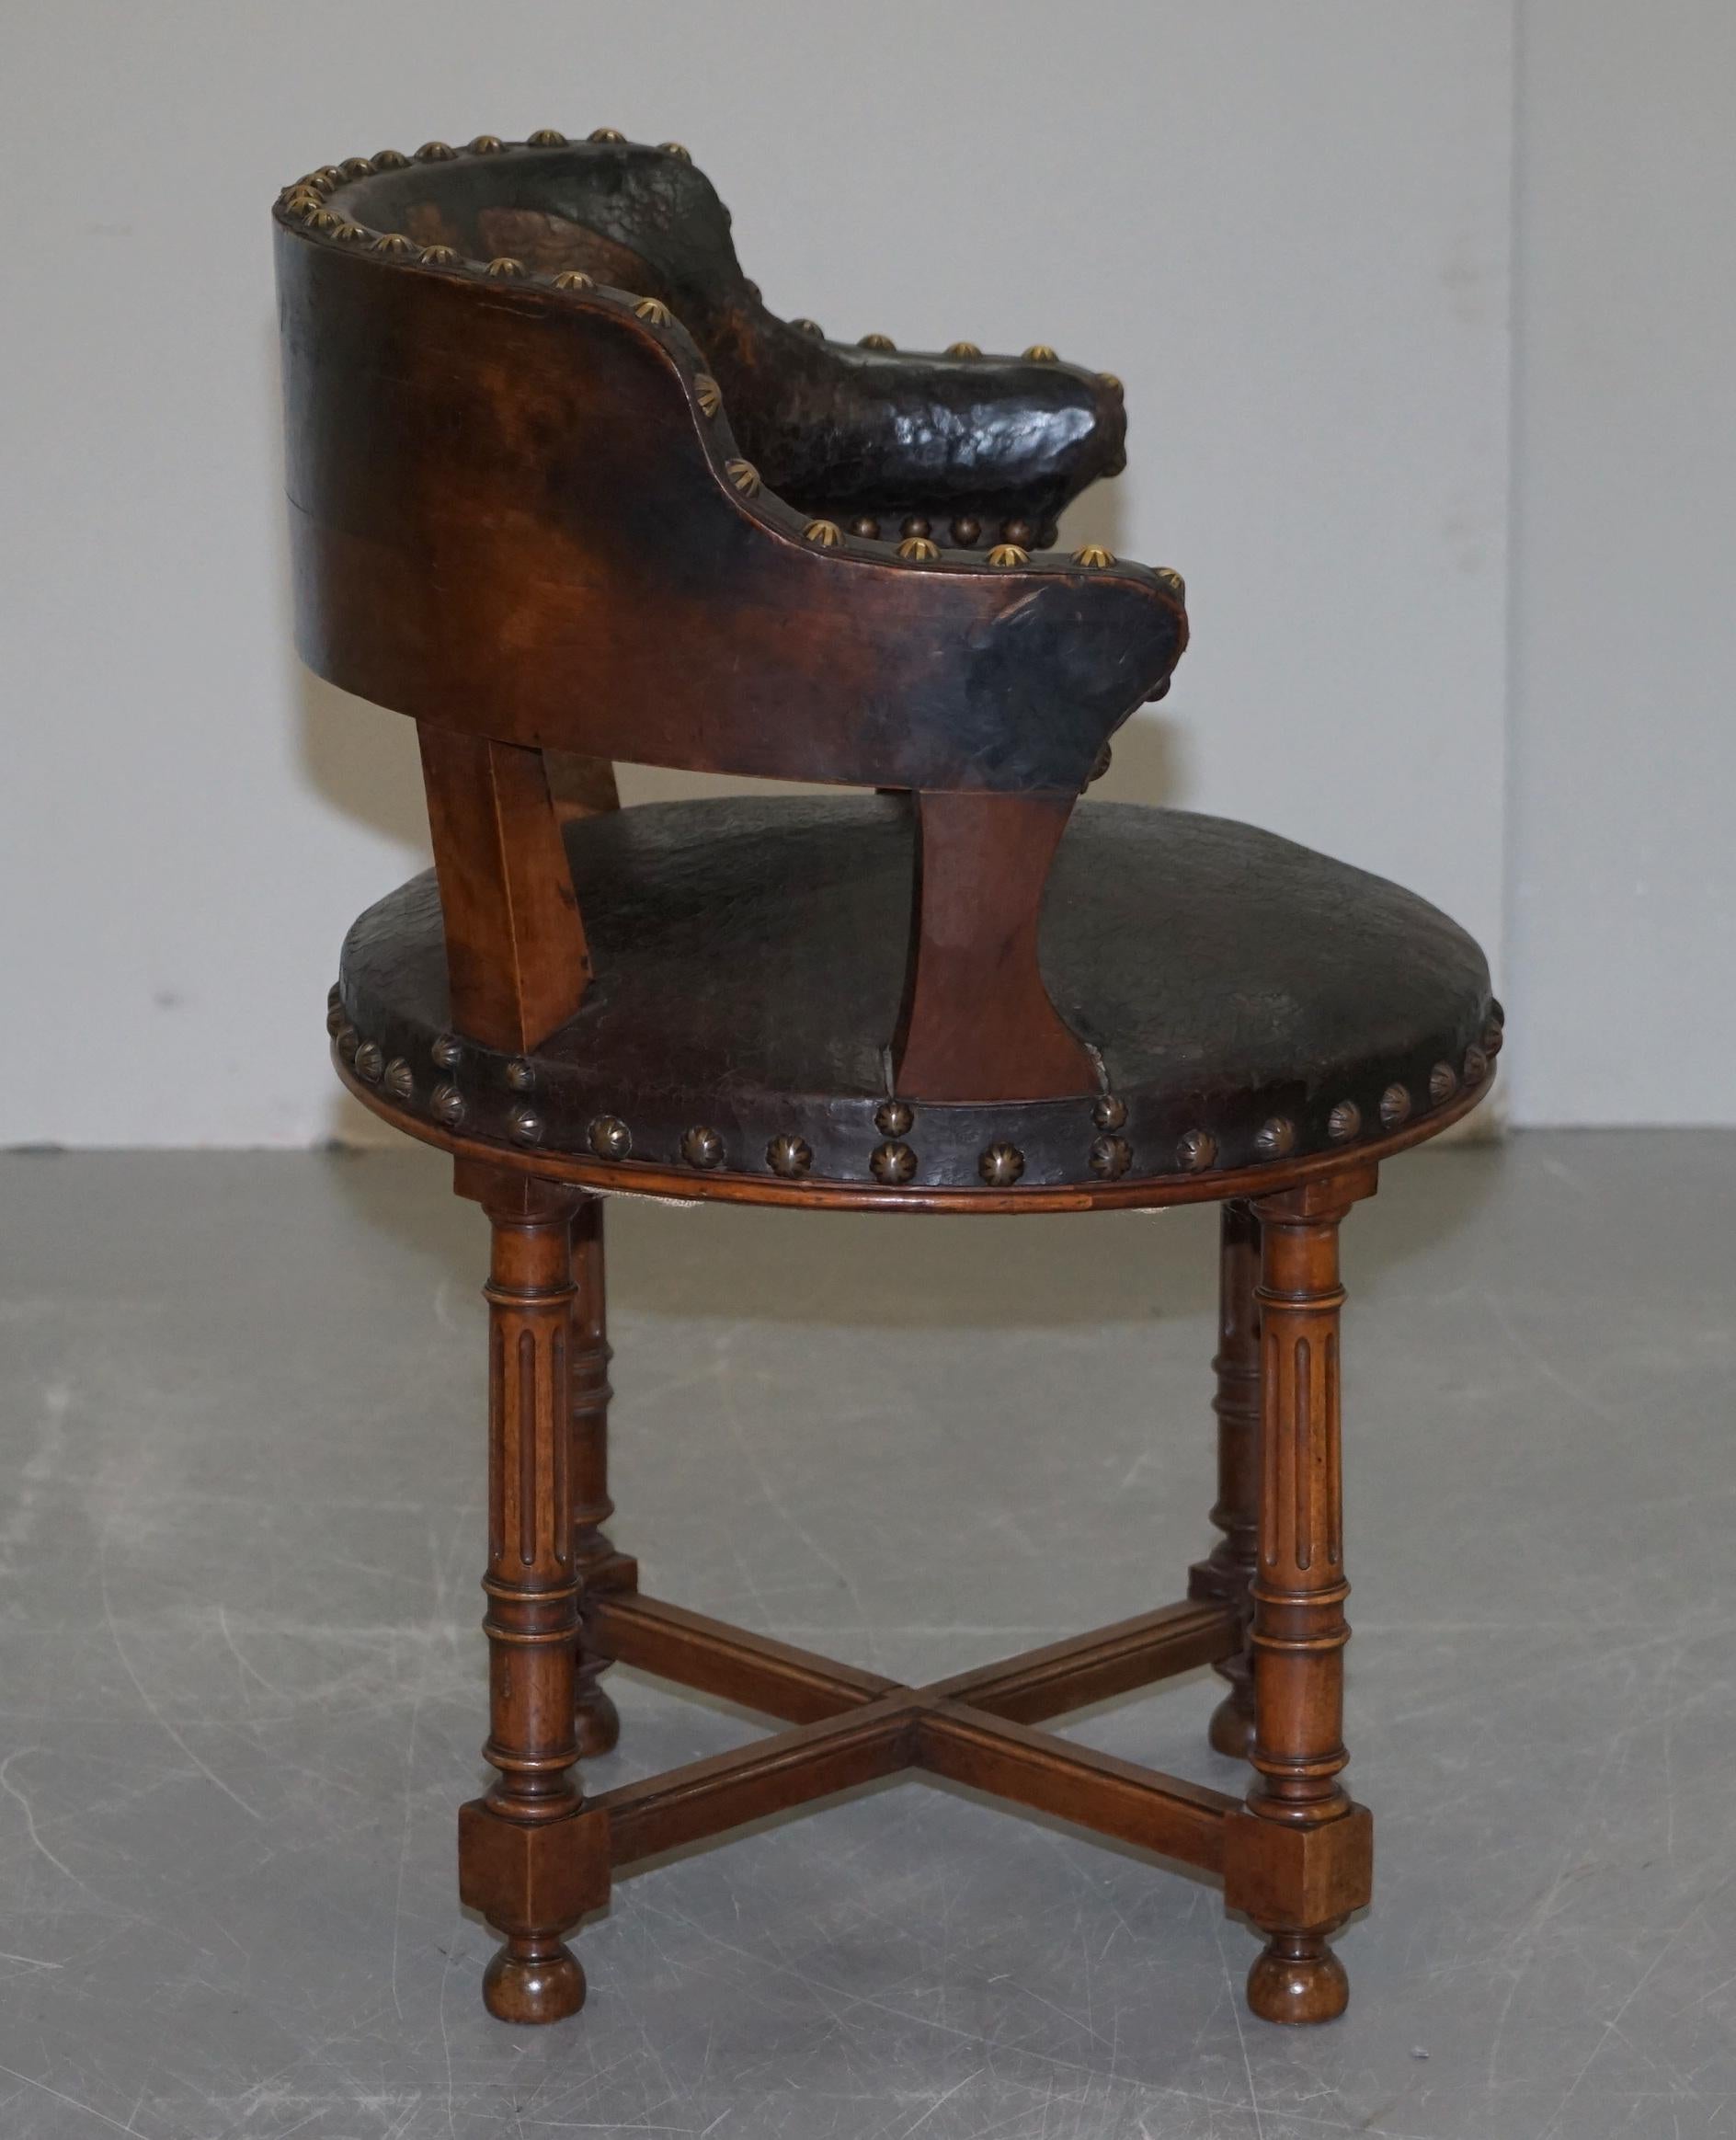 Antique Captains Chair with Embossed Leather Armorial Coat of Arms, circa 1880 10